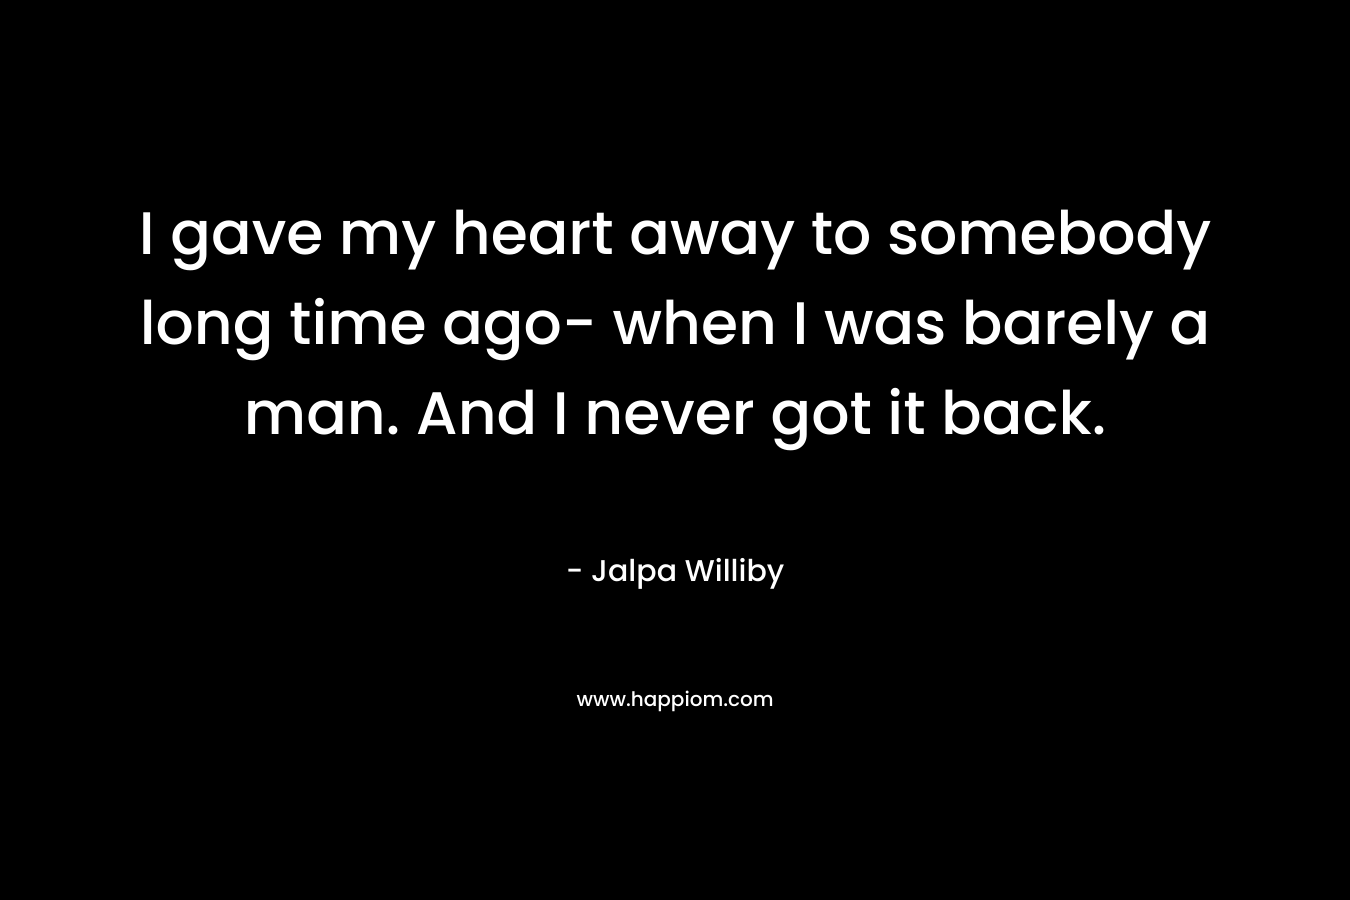 I gave my heart away to somebody long time ago- when I was barely a man. And I never got it back.